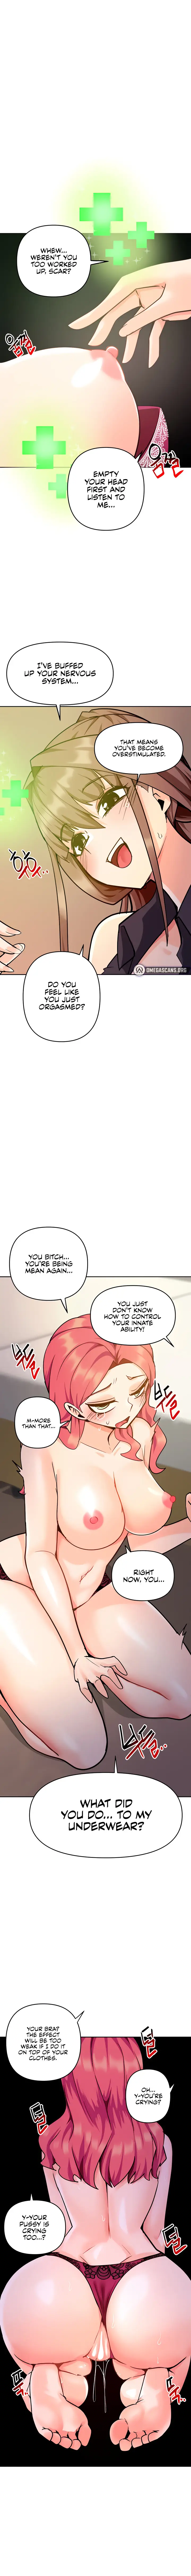 the-hypnosis-app-was-fake-chap-35-2